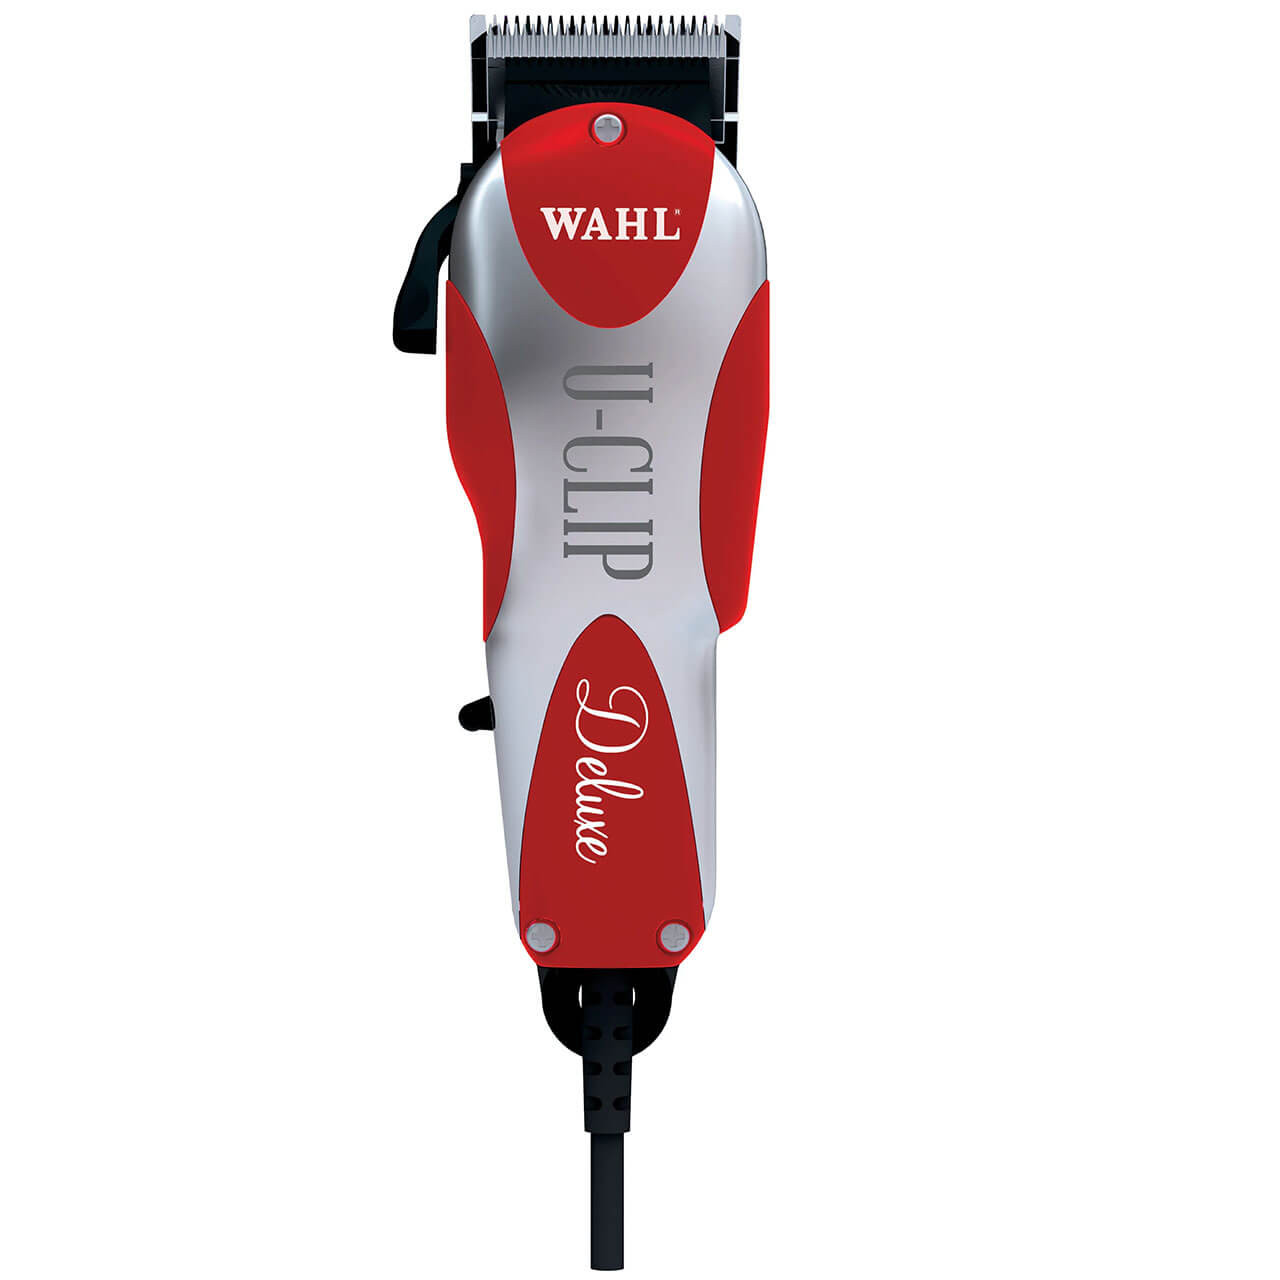 Wahl Home Products Deluxe All-In-One Hair Clipper and Trimmer